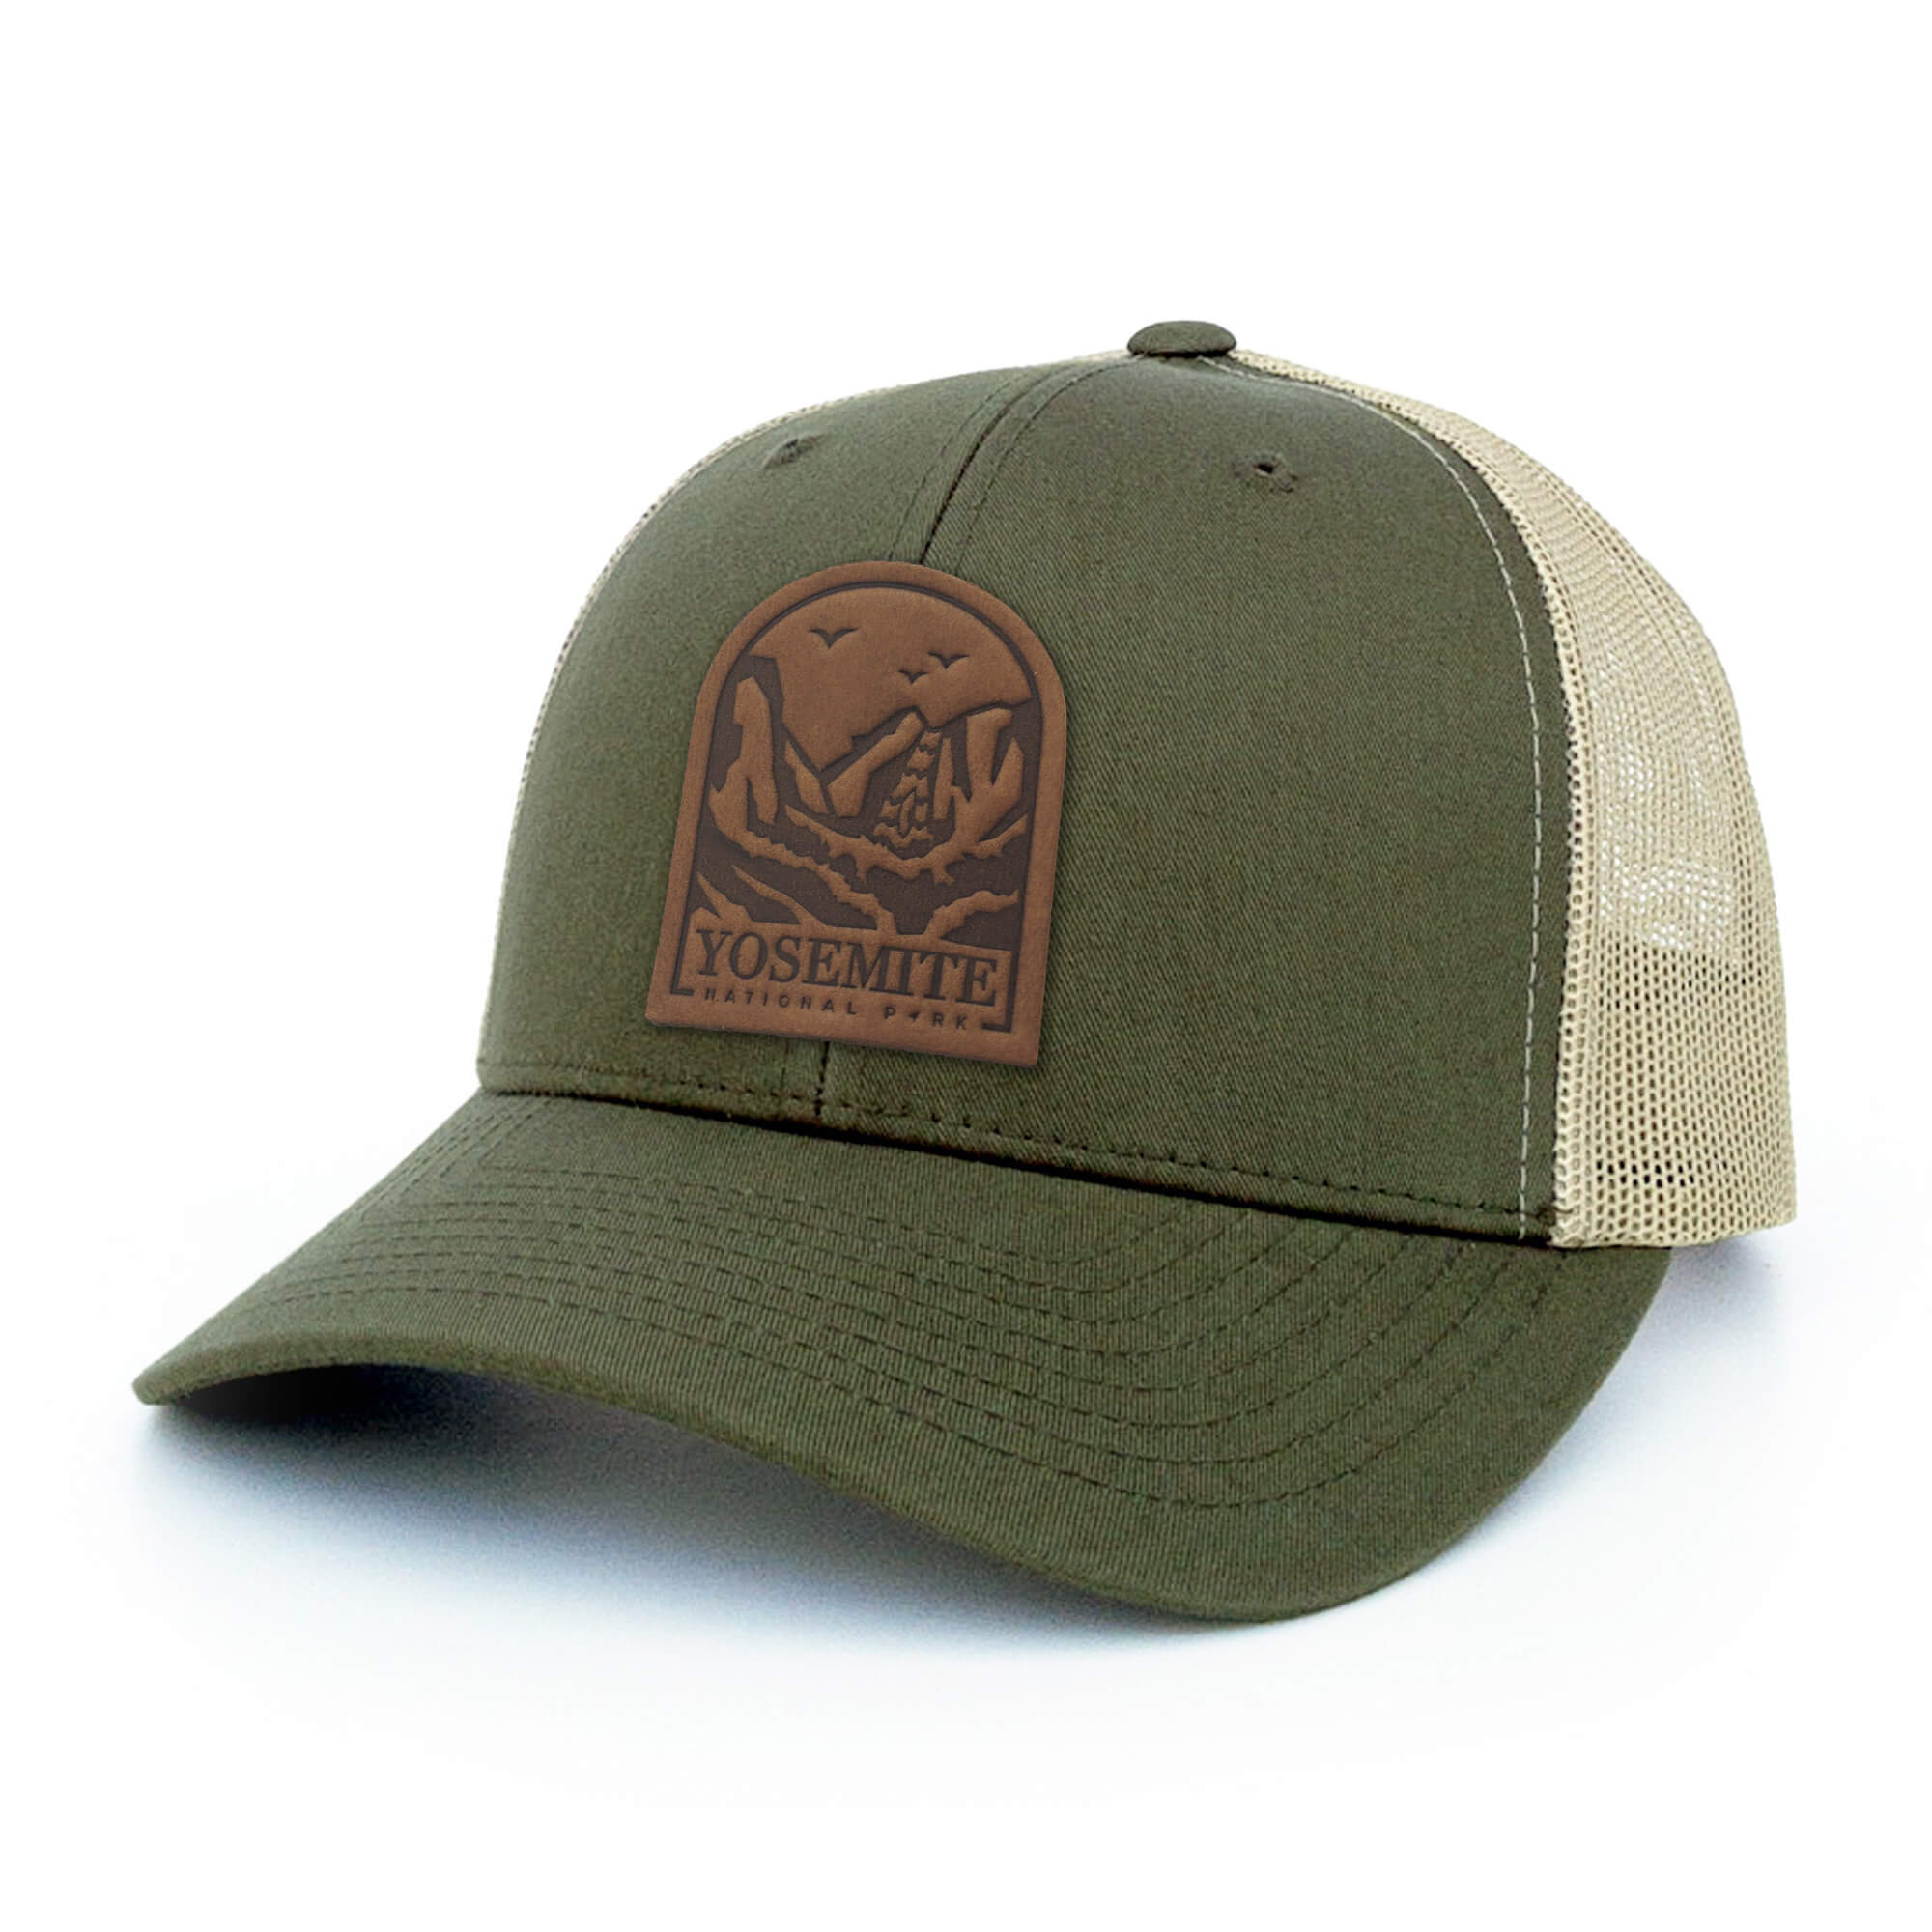 Moss green and khaki trucker hat with full-grain leather patch of Yosemite National Park | BLACK-007-002, CHARC-007-002, NAVY-007-002, HGREY-007-002, MOSS-007-002, BROWN-007-002